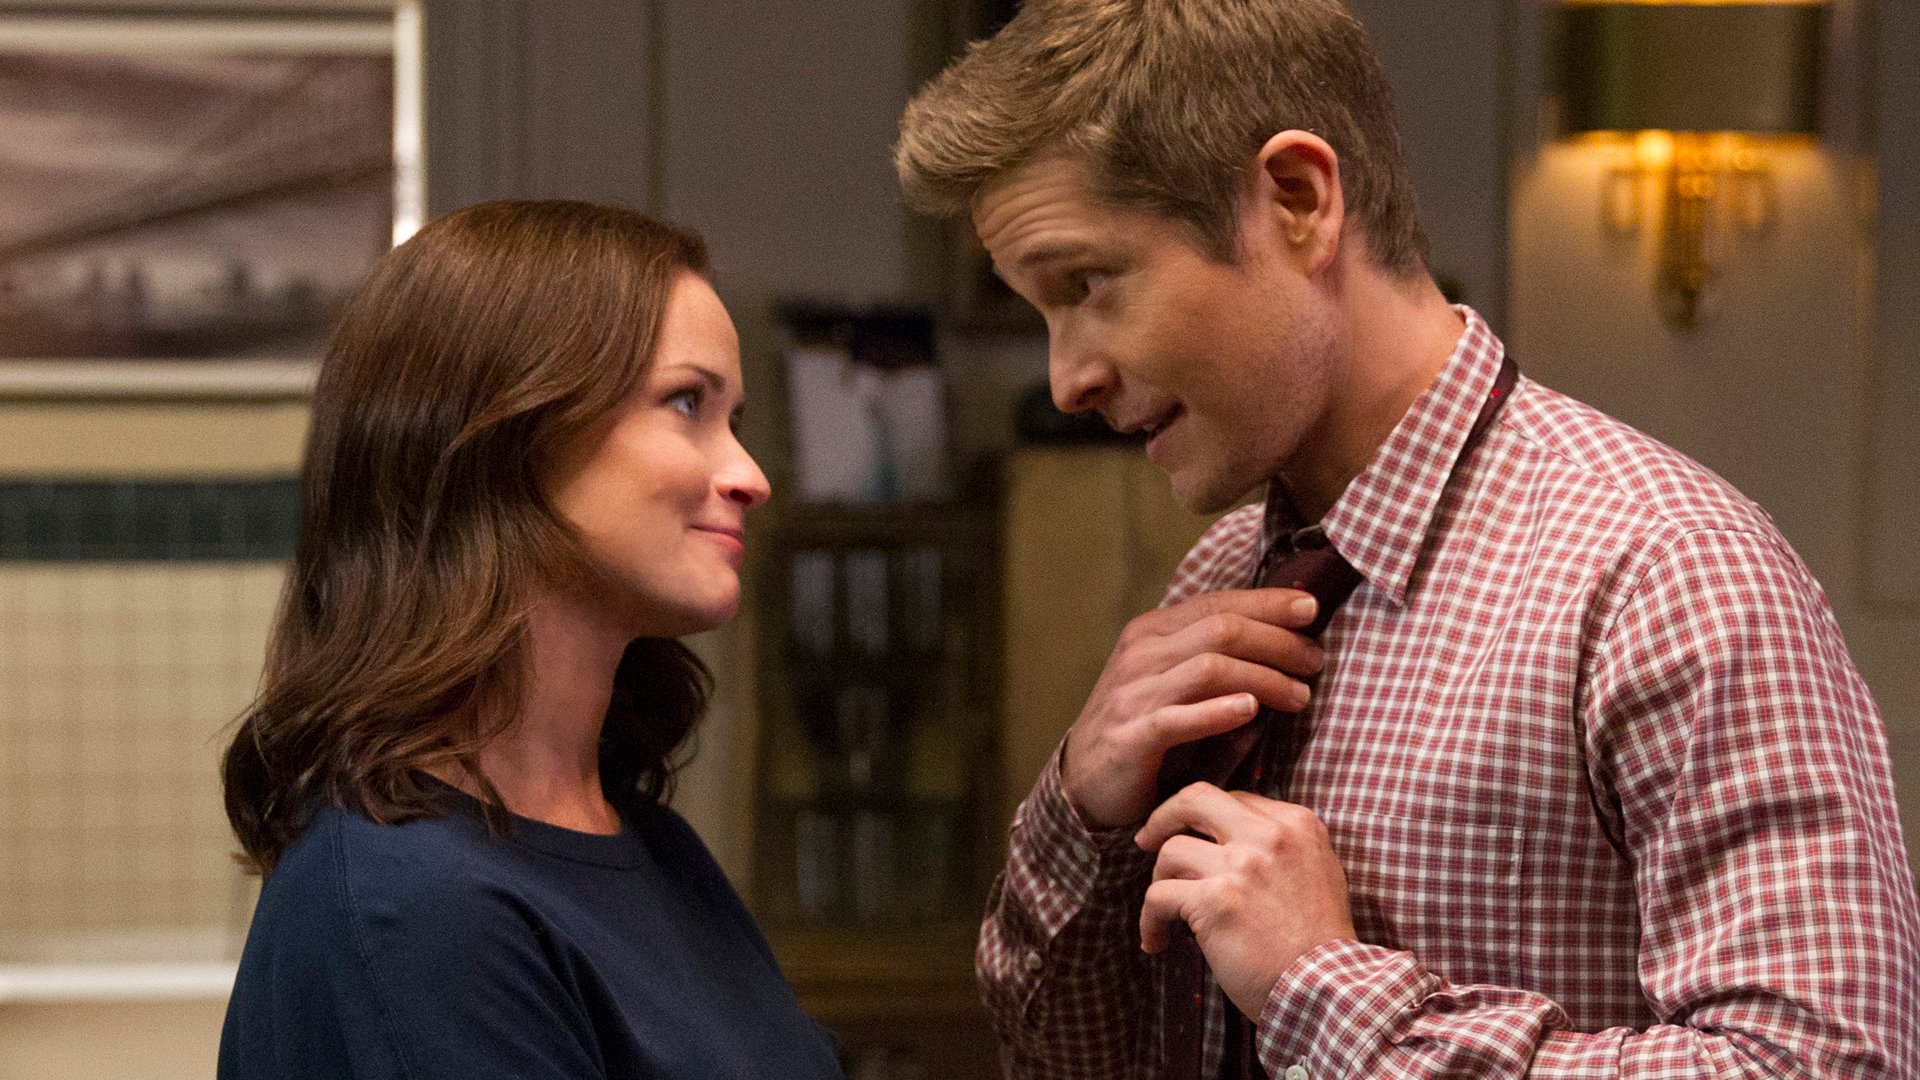 Alexis Bledel stands in front of Matt Czuchry as he adjusts his tie on 'Gilmore Girls: A Year in the Life' in 2016